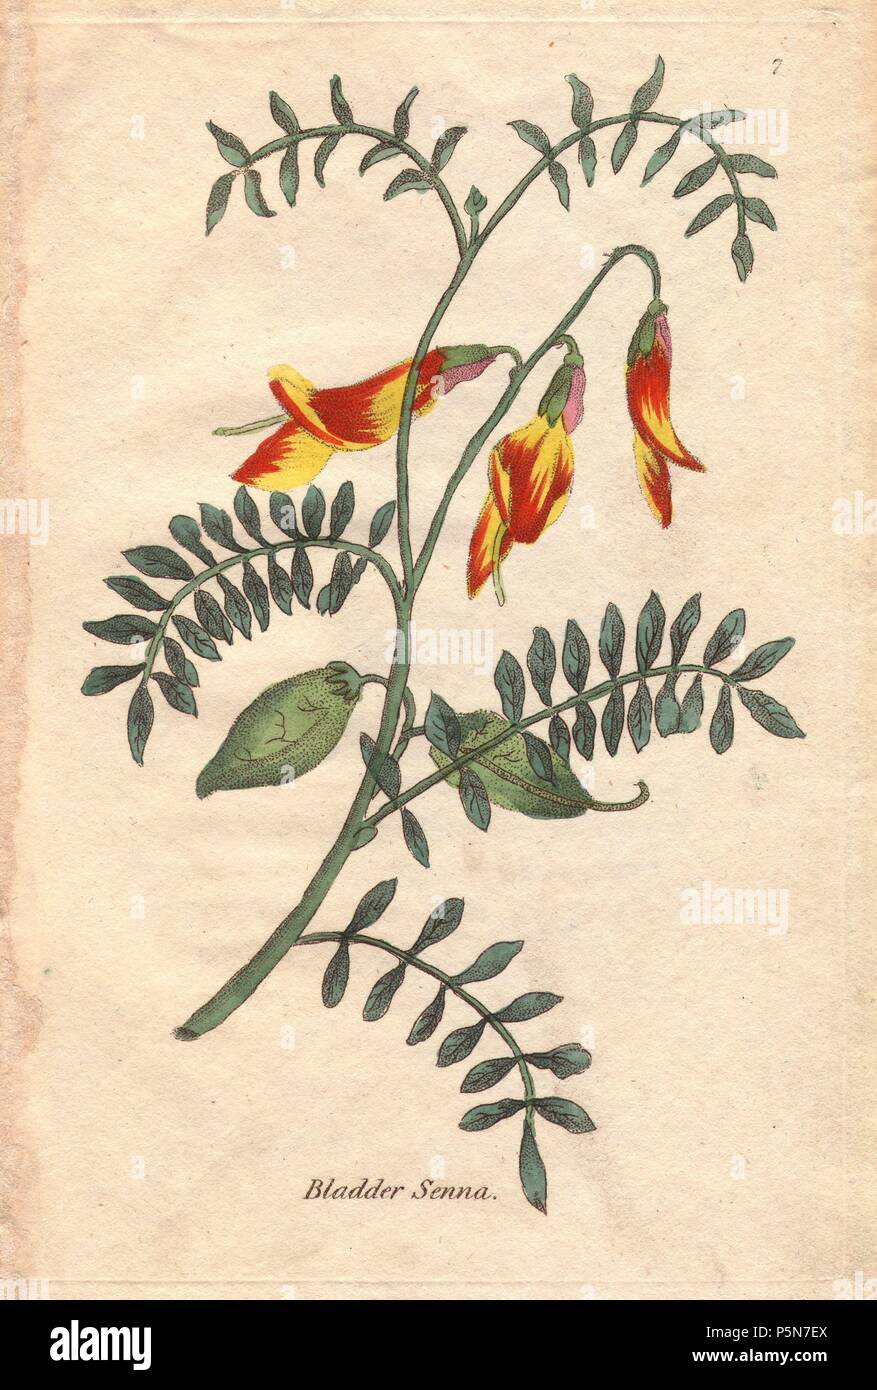 Bladder senna, Colutea frutescens, with bright orange and yellow flowers, vivid green small pinnately compound leaves, and two large green bladders (seed pods) in the center. The whole flower shown spreading dynamically across the page. . Illustration by Henrietta Moriarty from 'Fifty Plates of Greenhouse Plants' (1807), a re-issue of her own 'Viridarium' (1806), with handcoloured copperplate engravings. Moriarty was a colonel's widow who turned to writing novels and illustrating botanical books to support her four children. Stock Photo